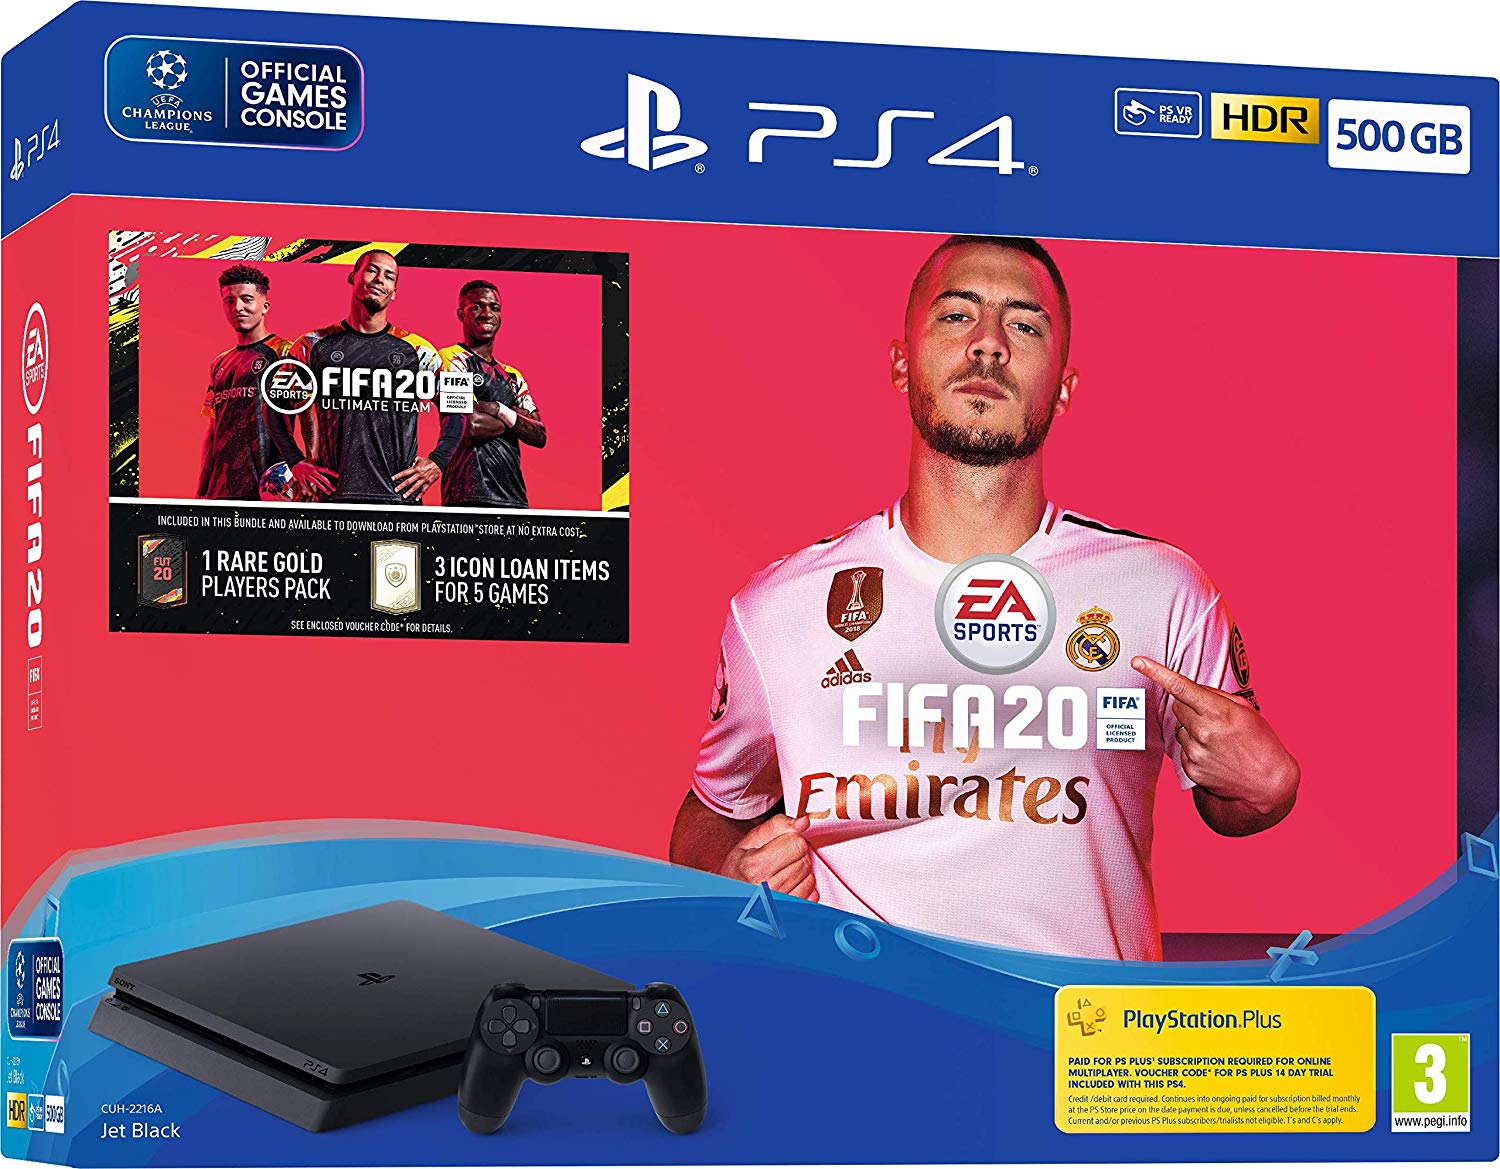 egyptisk kontrollere shuttle Fifa 20 500GB PS4 Bundle (CUH - 2216) Best price in Bangladesh - PXNGAME